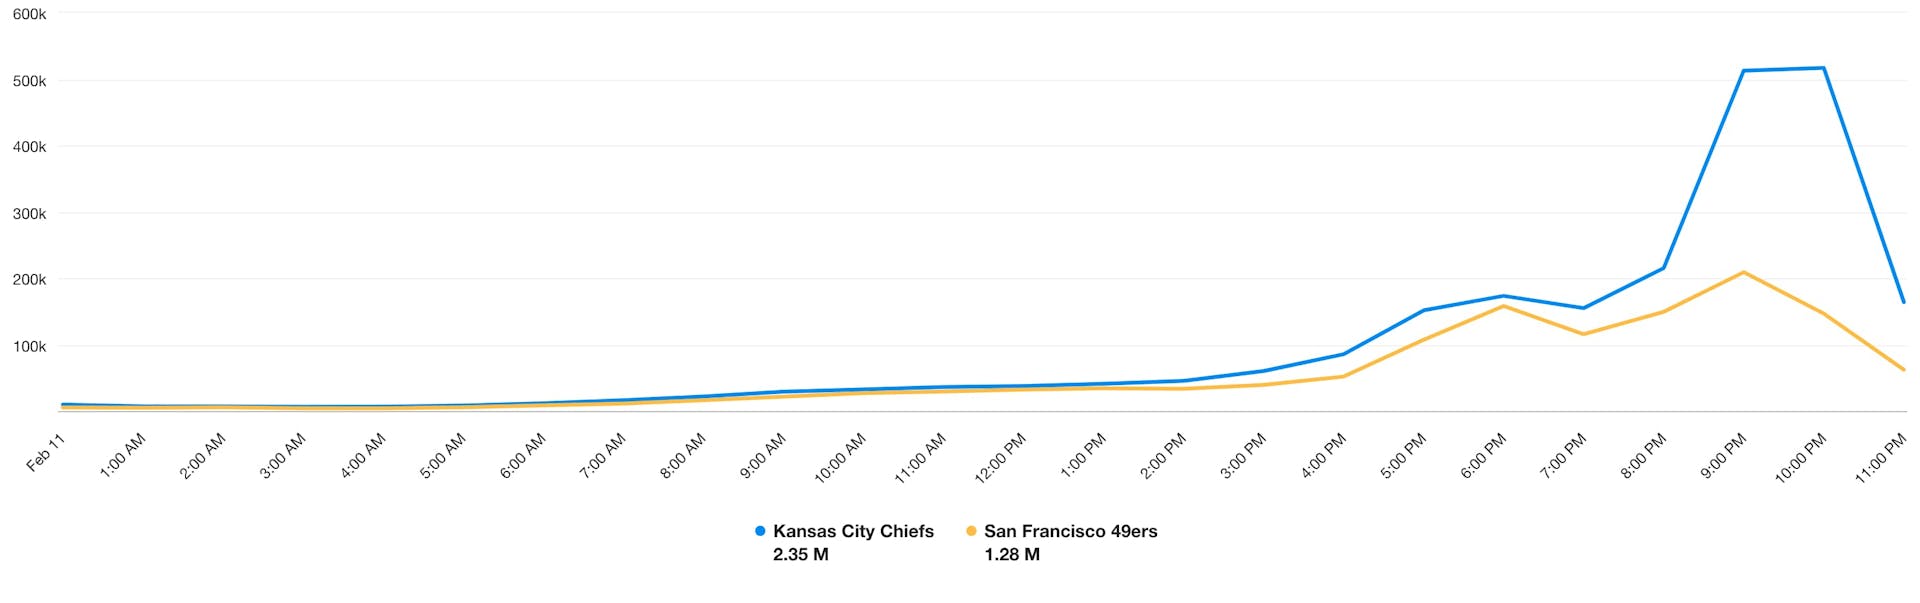 A line chart showing that the volume mentions of the Kansas City Chiefs was higher than those of the San Francisco 49ers on February 11.